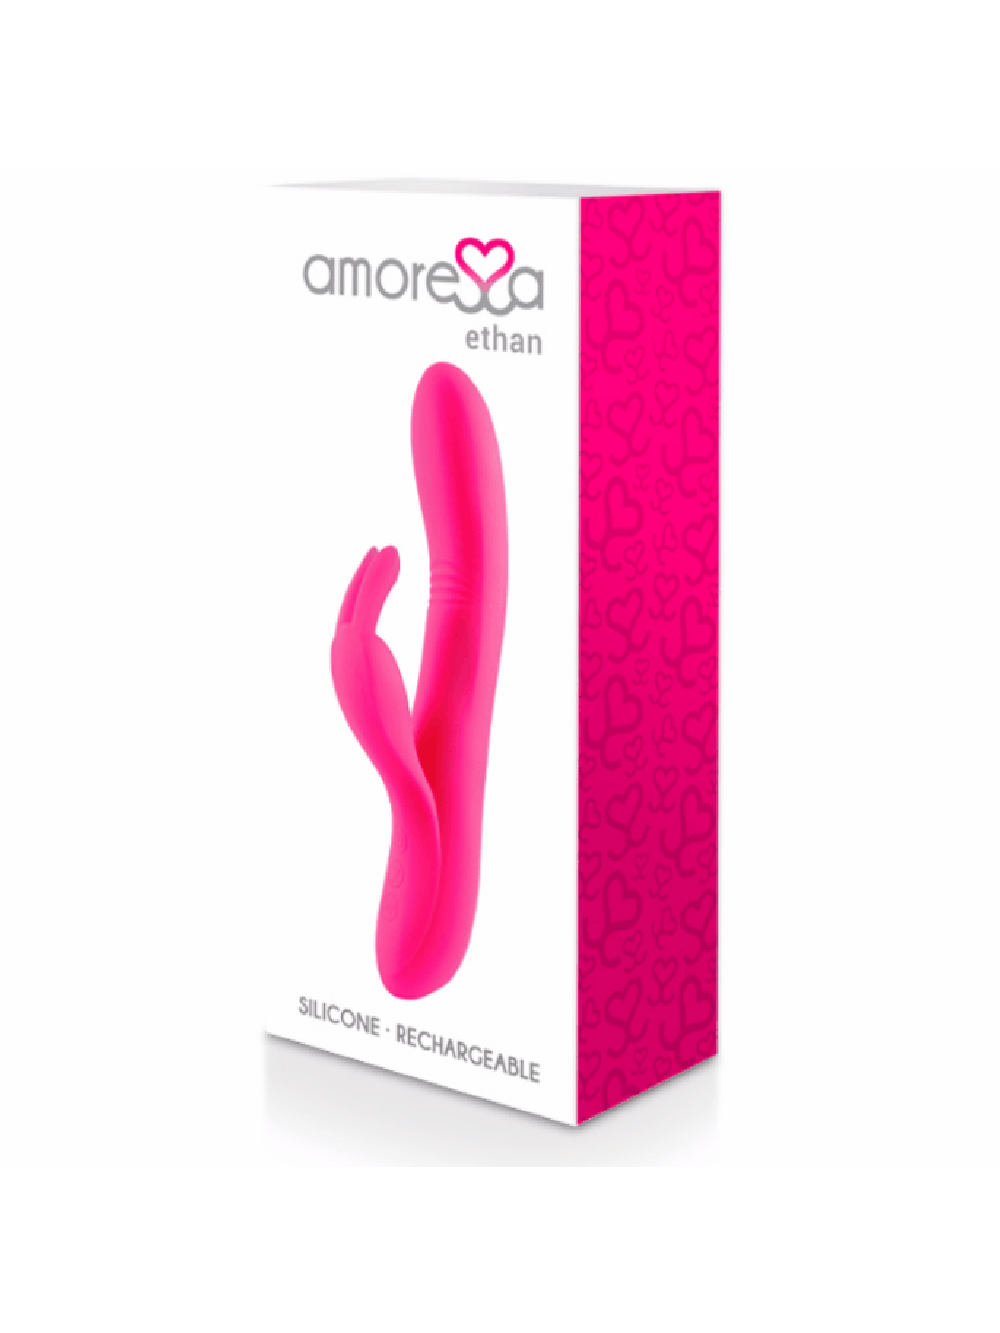 ETHAN PREMIUM SILICONE RECHARGEABLE 8425402155783